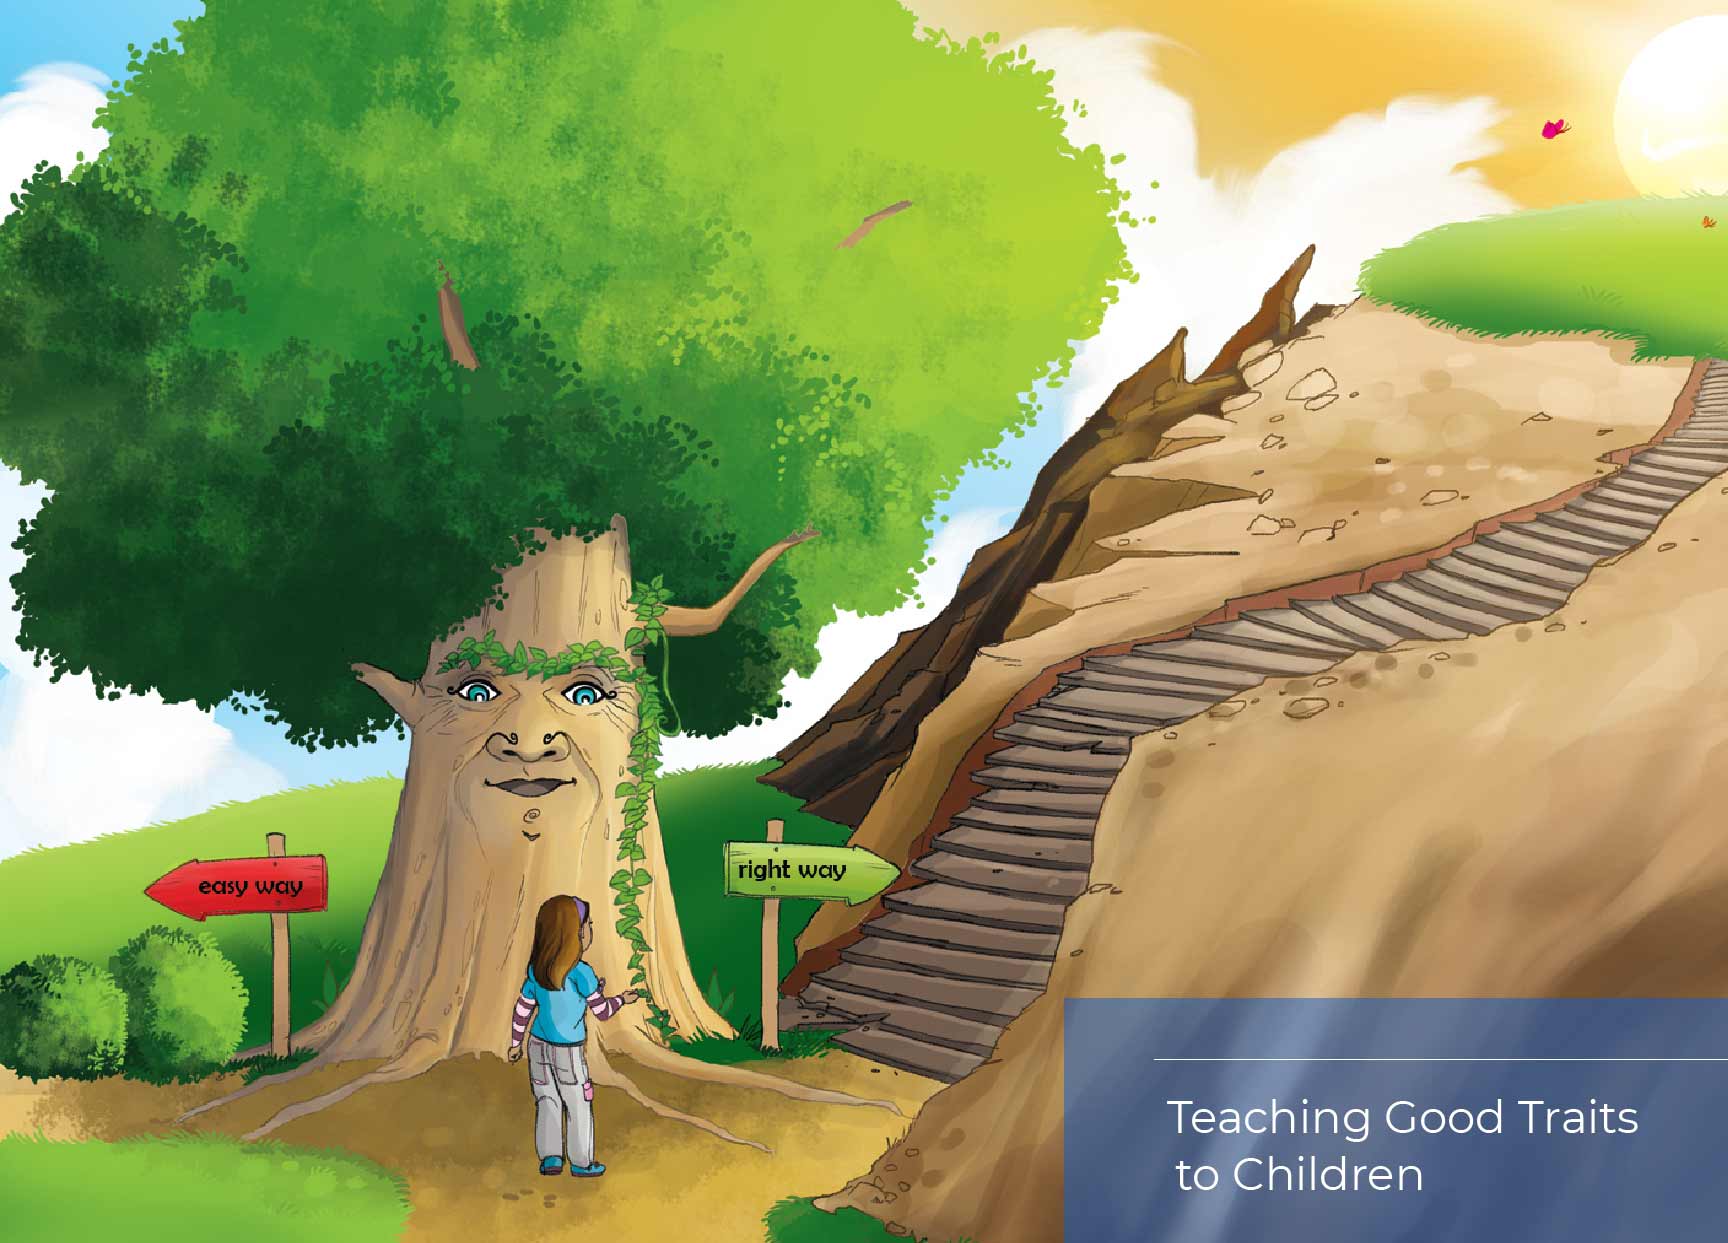 Resources on teaching kids values and morals